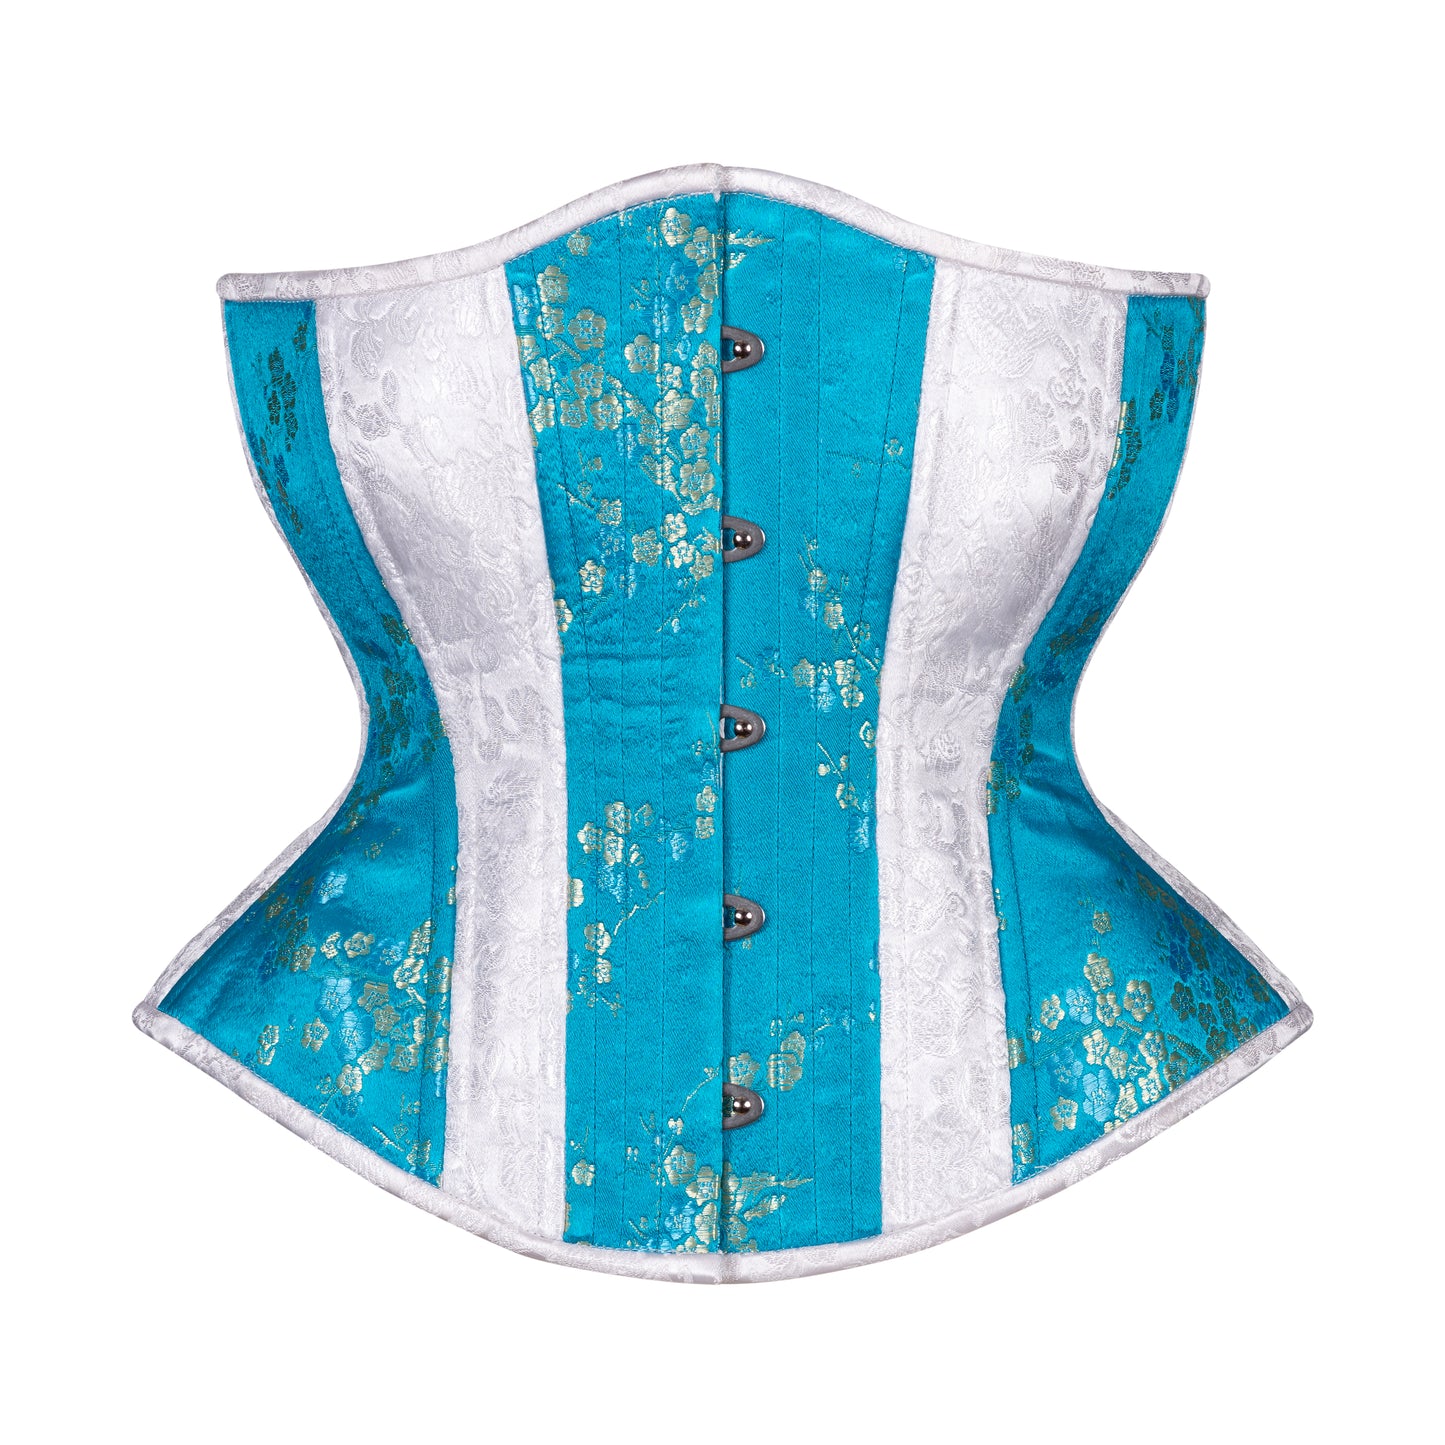 Floral in White and Blue Novice Corset, Hourglass Silhouette, Regular